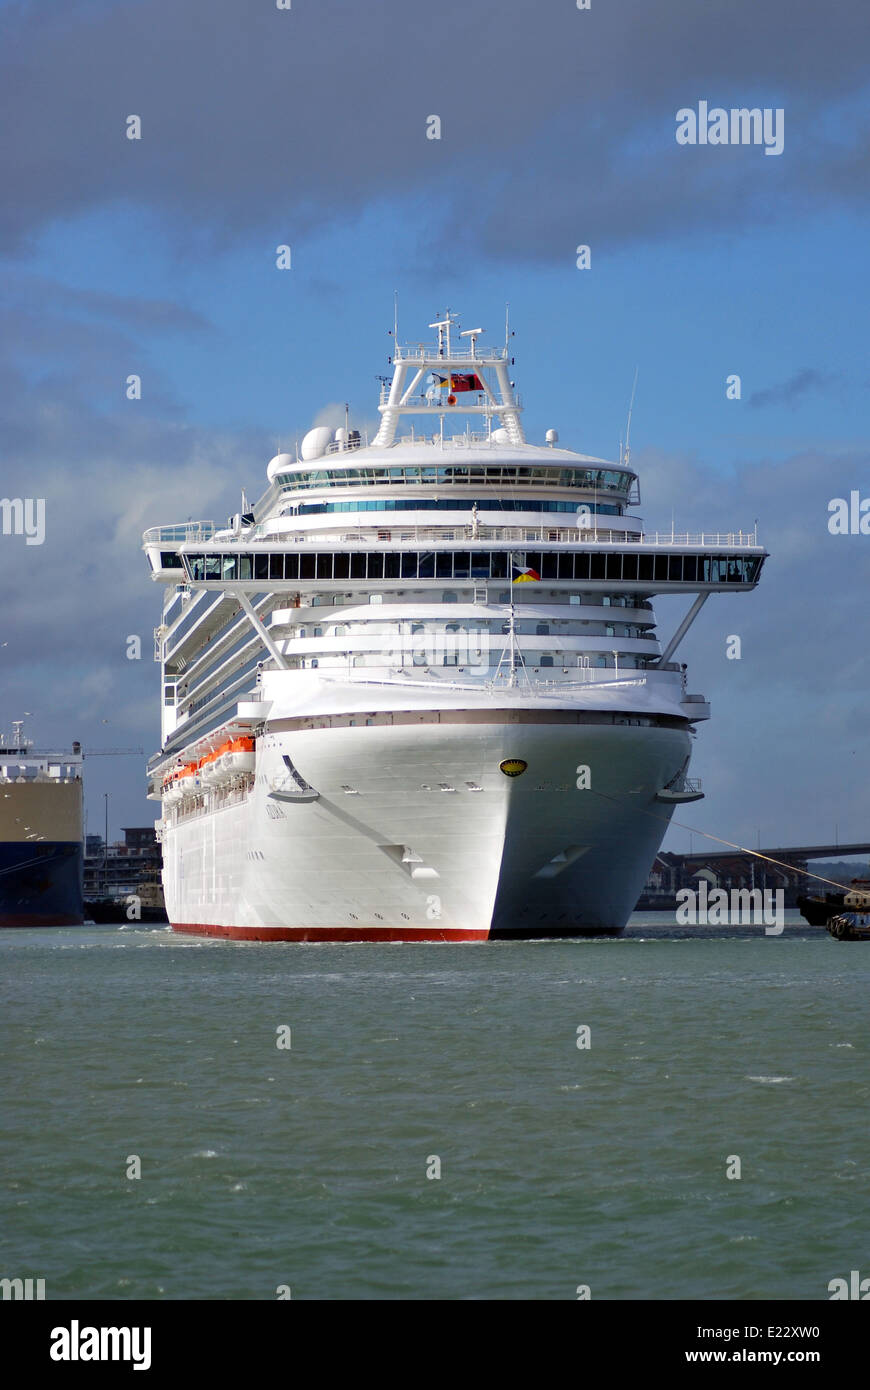 The cruise ship Azura operated by P&O cruises departs from Southampton on a cruise to Portugal. Stock Photo